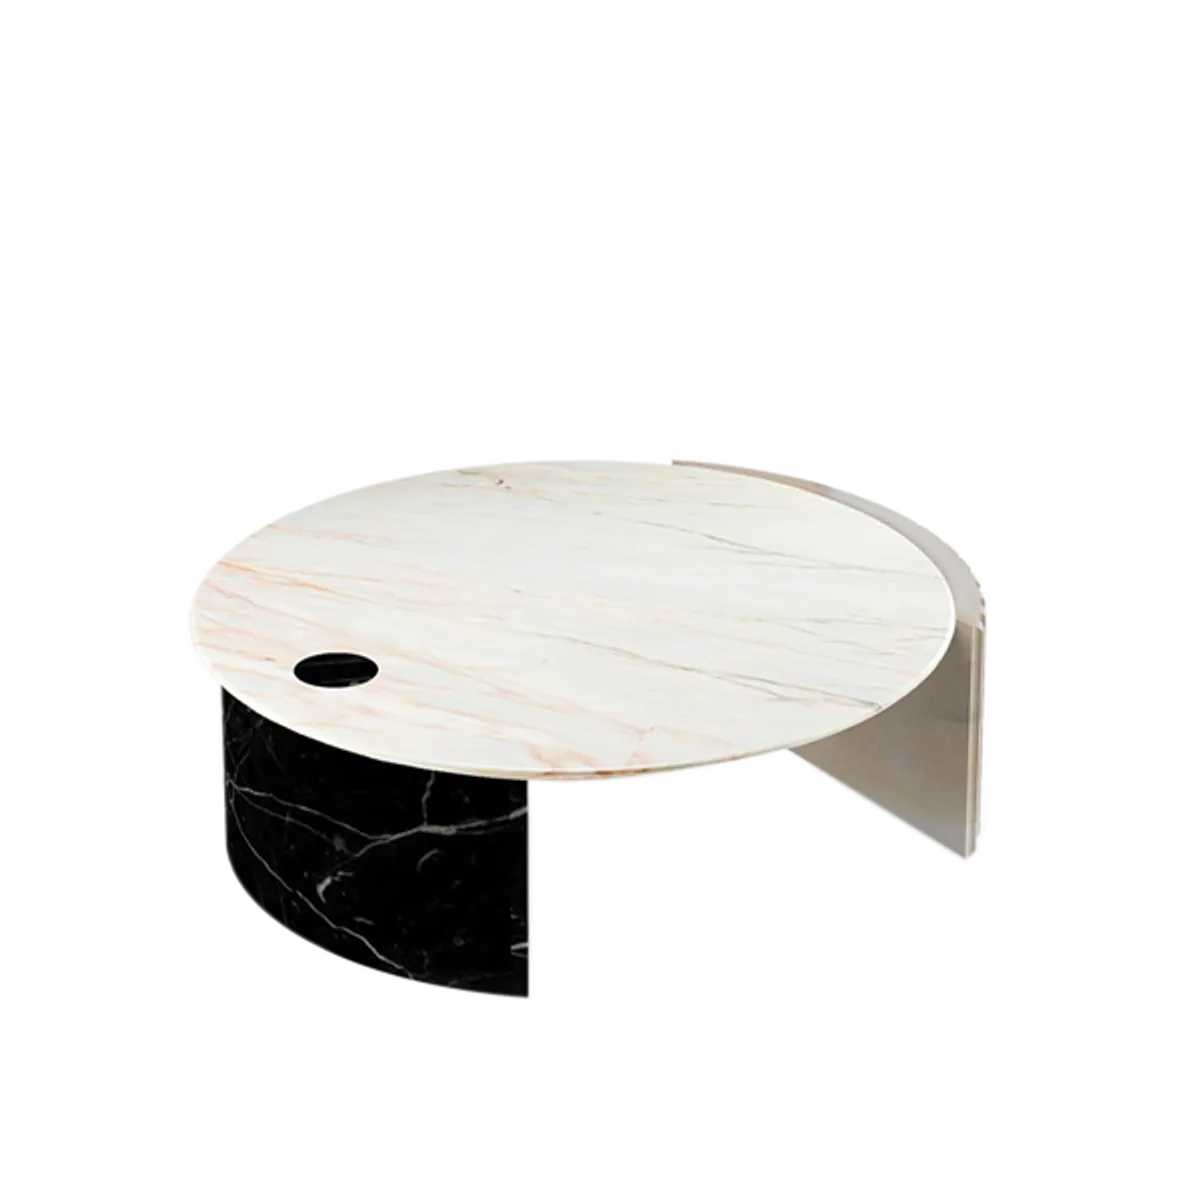 Web Sula Marble Coffee Table By Insideoutcontracts